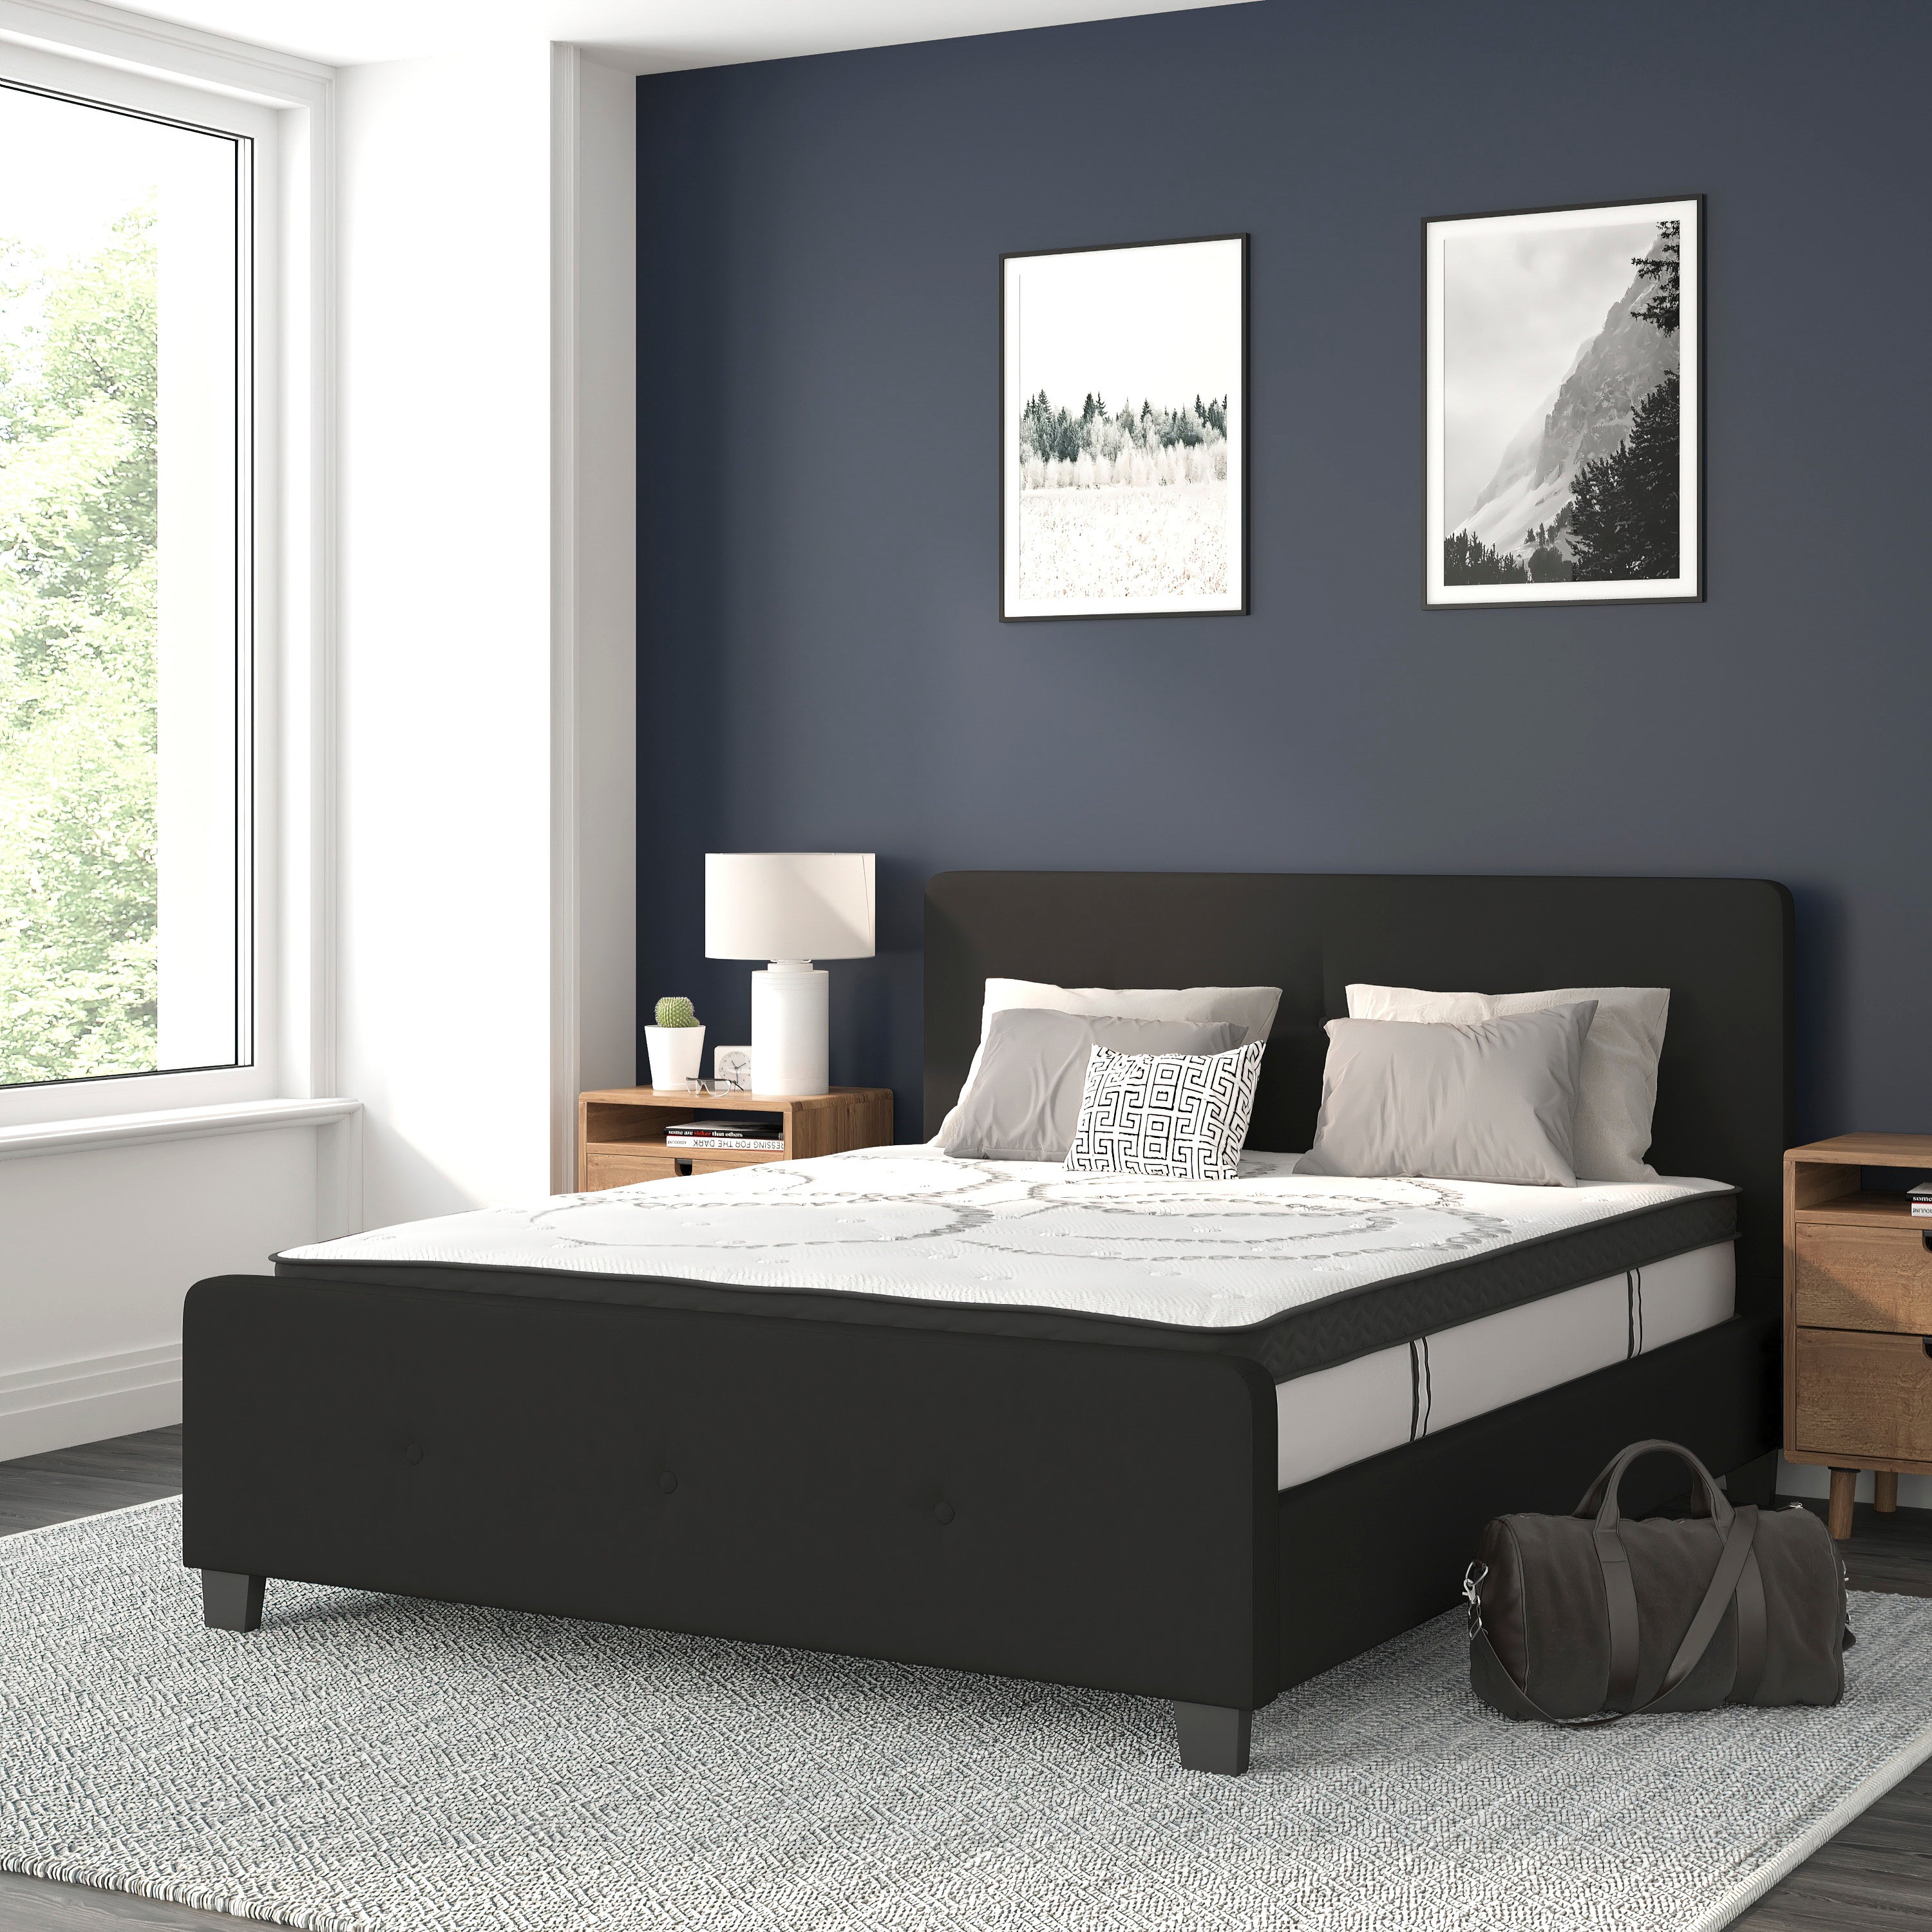 Tribeca Tufted Upholstered Platform Bed with 10 Inch CertiPUR-US Certified Foam and Pocket Spring Mattress-Bed & Mattress-Flash Furniture-Wall2Wall Furnishings